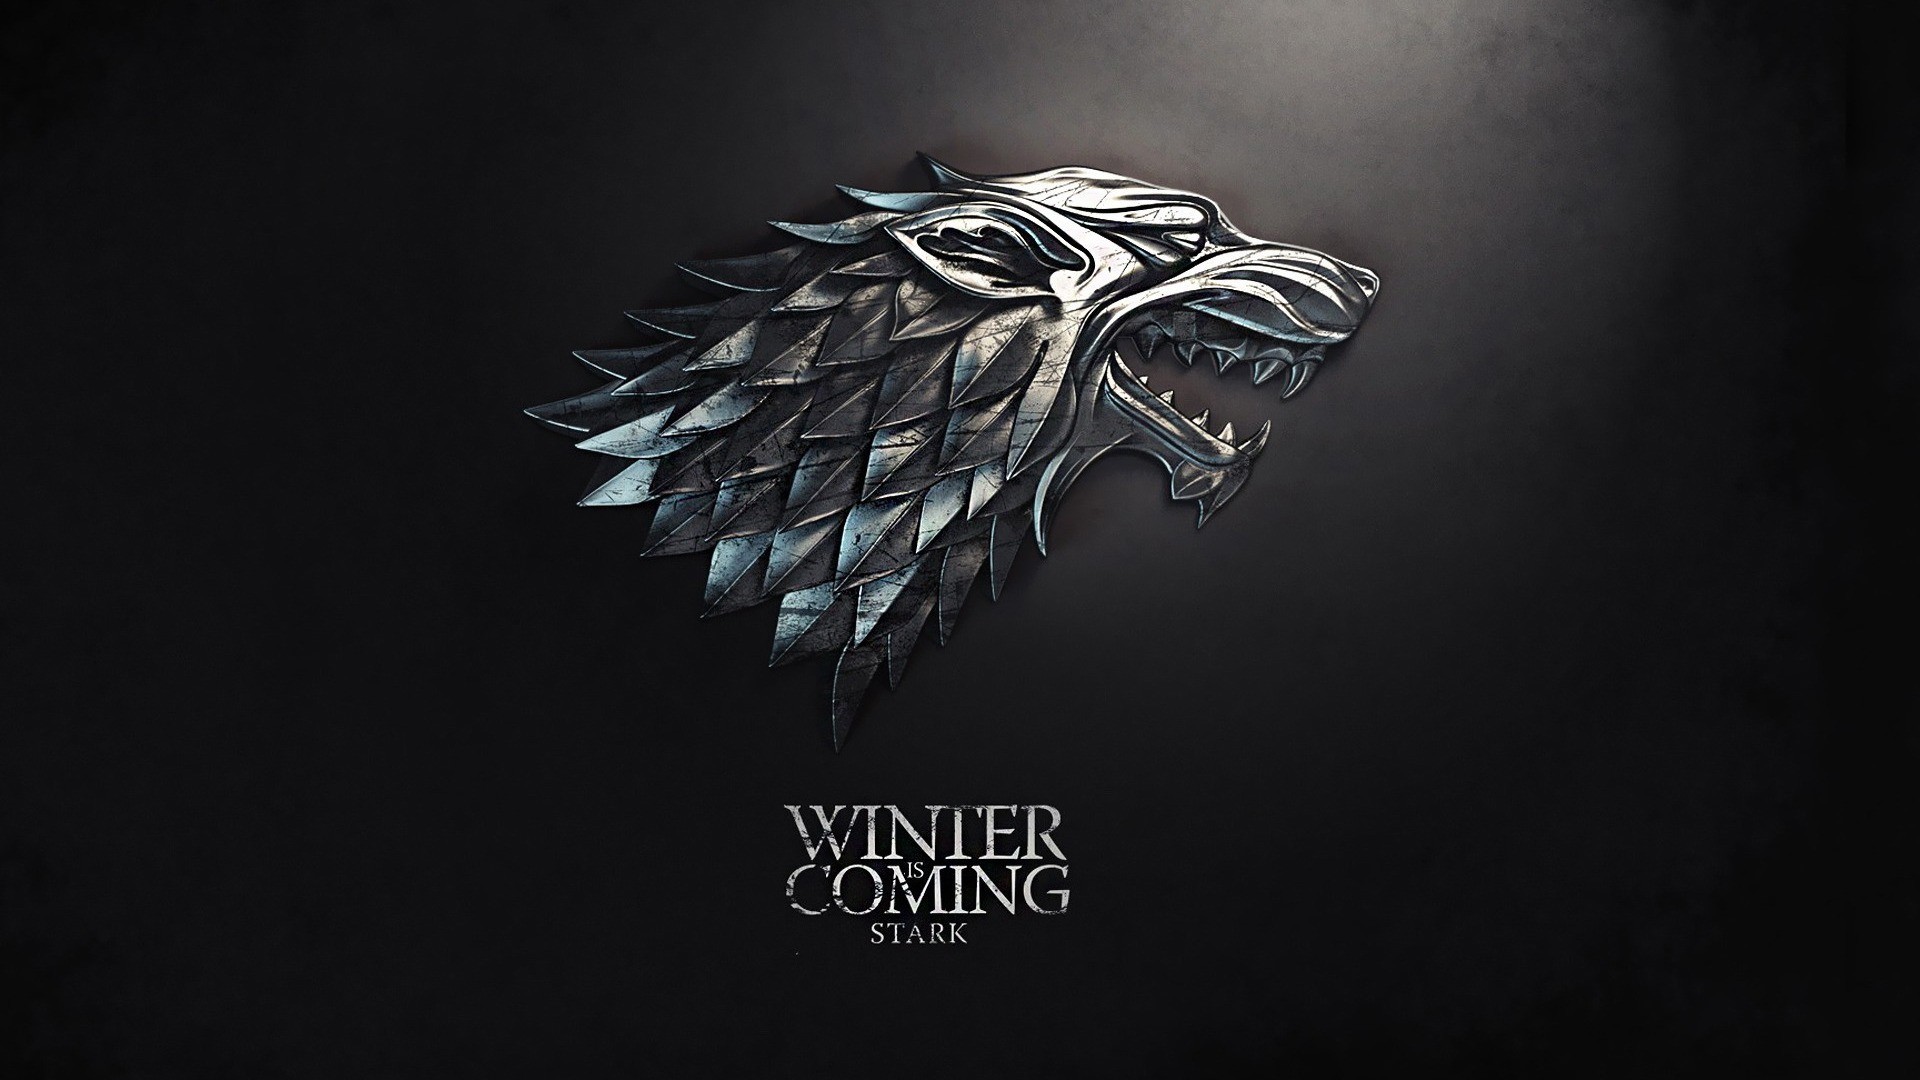 Fonds dcran Game Of Thrones tous les wallpapers Game Of Thrones